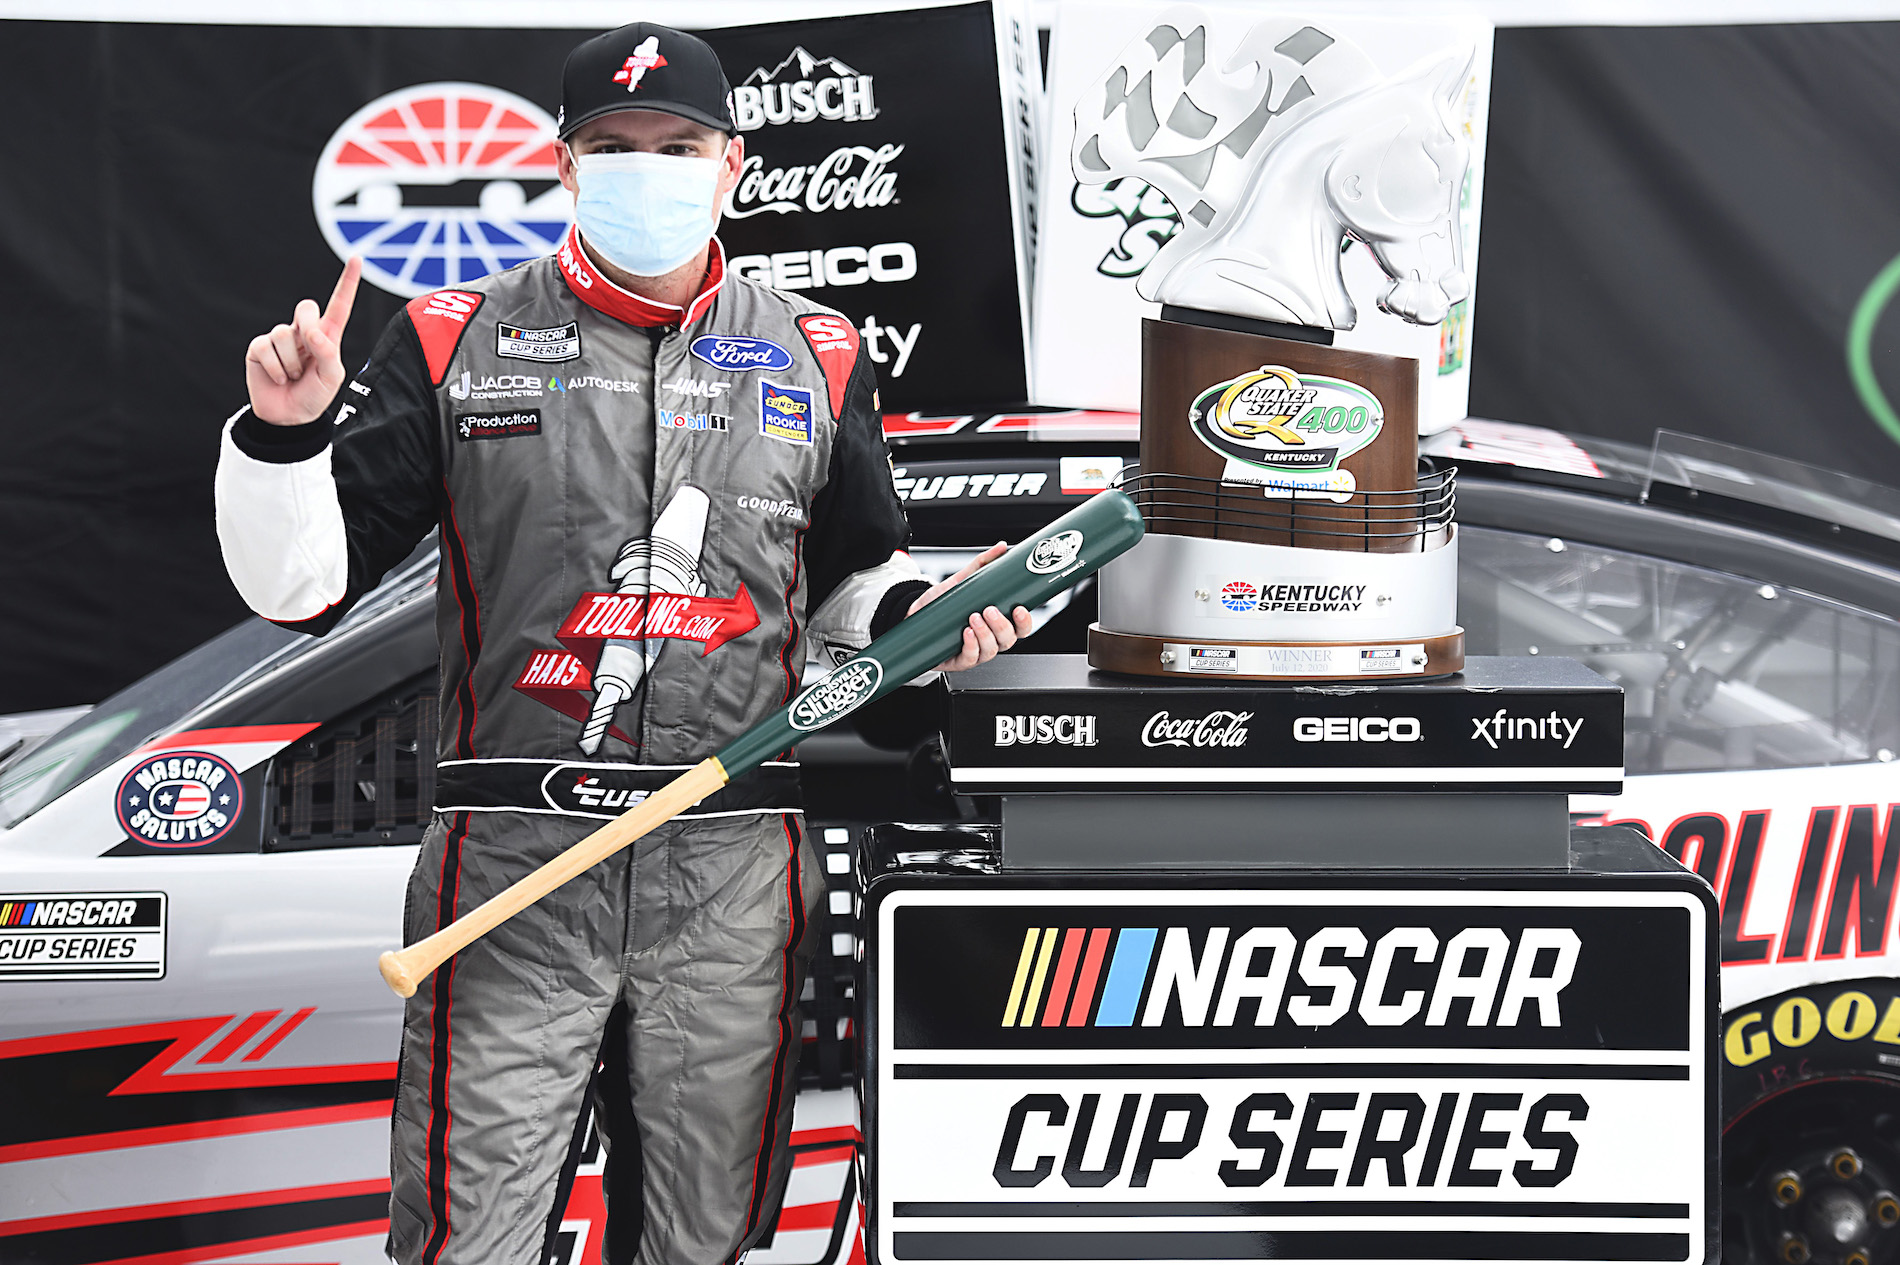 Cole Custer was a 250/1 longshot to win NASCAR's Quaker State 400 on Sunday, and his unlikely win made one lucky bettor a fortune.